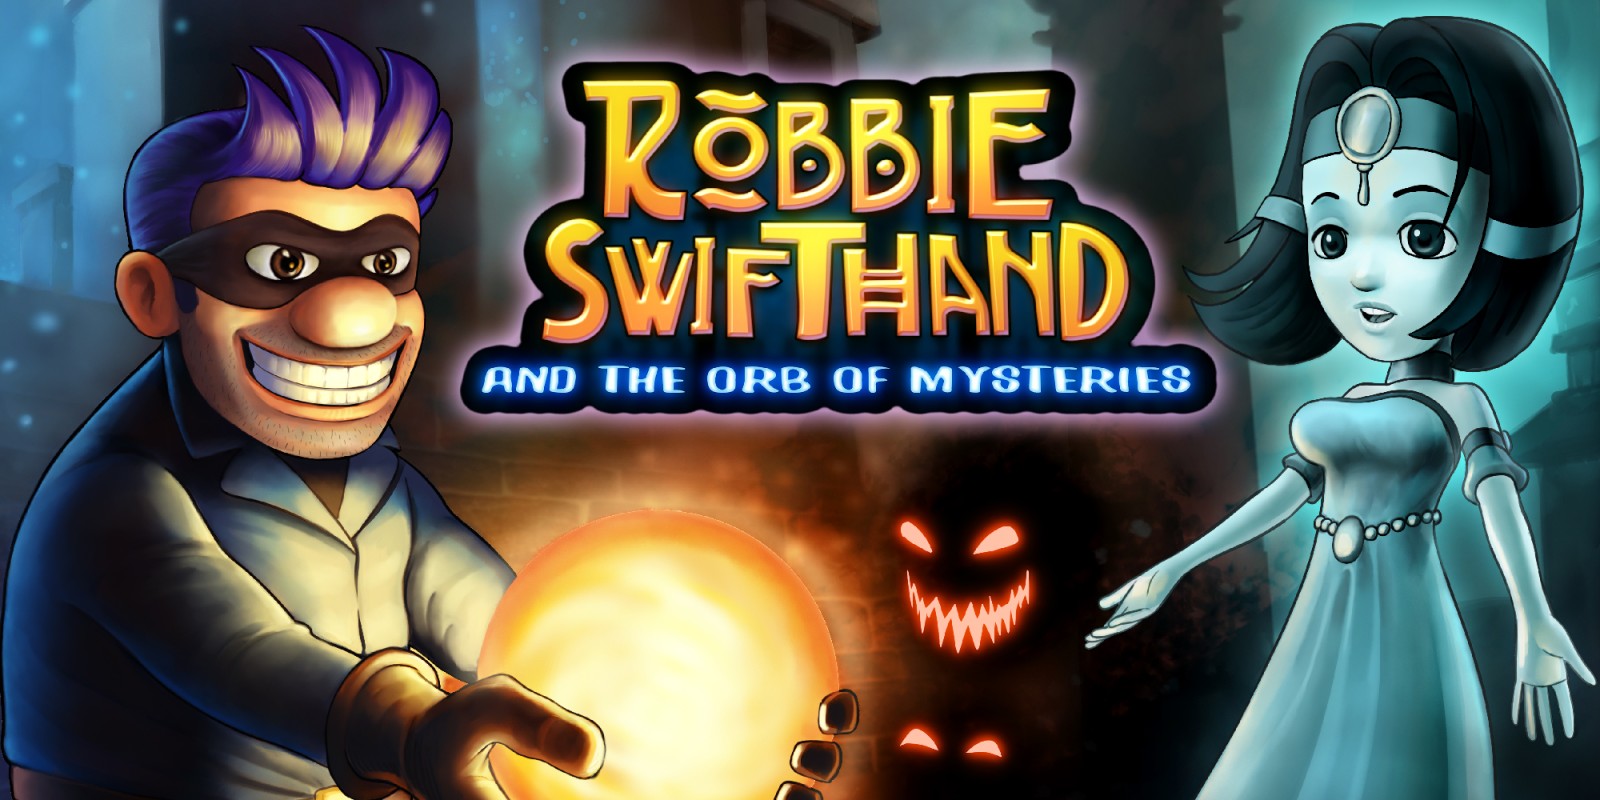 Robbie Swifthand and the Orb of Mysteries